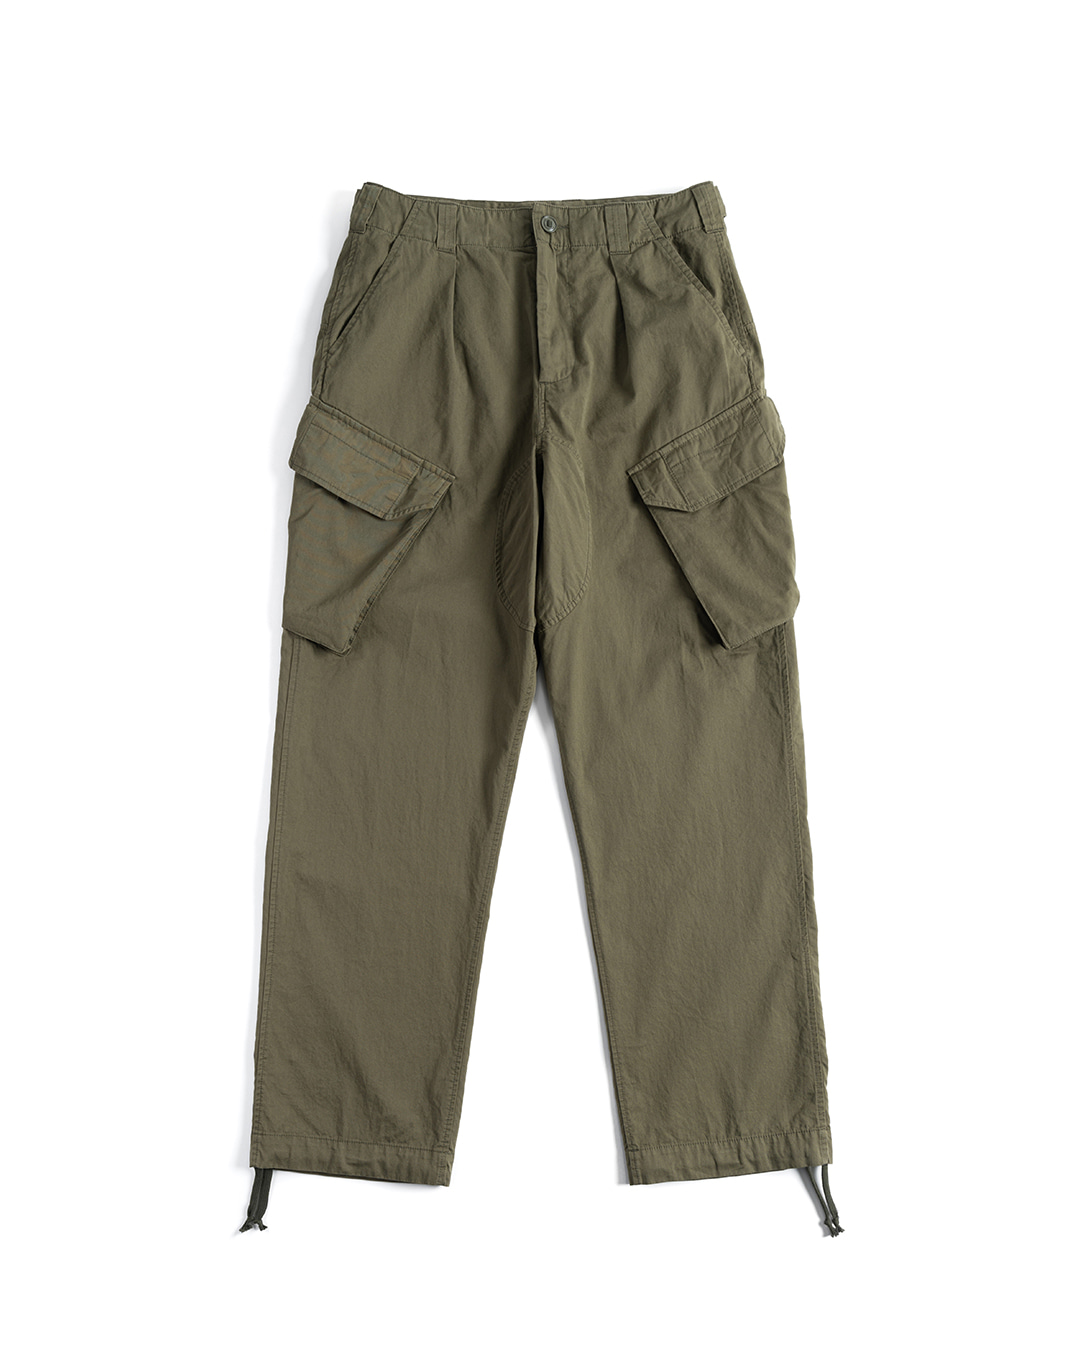 11 MILITARY PANTS (olive green)